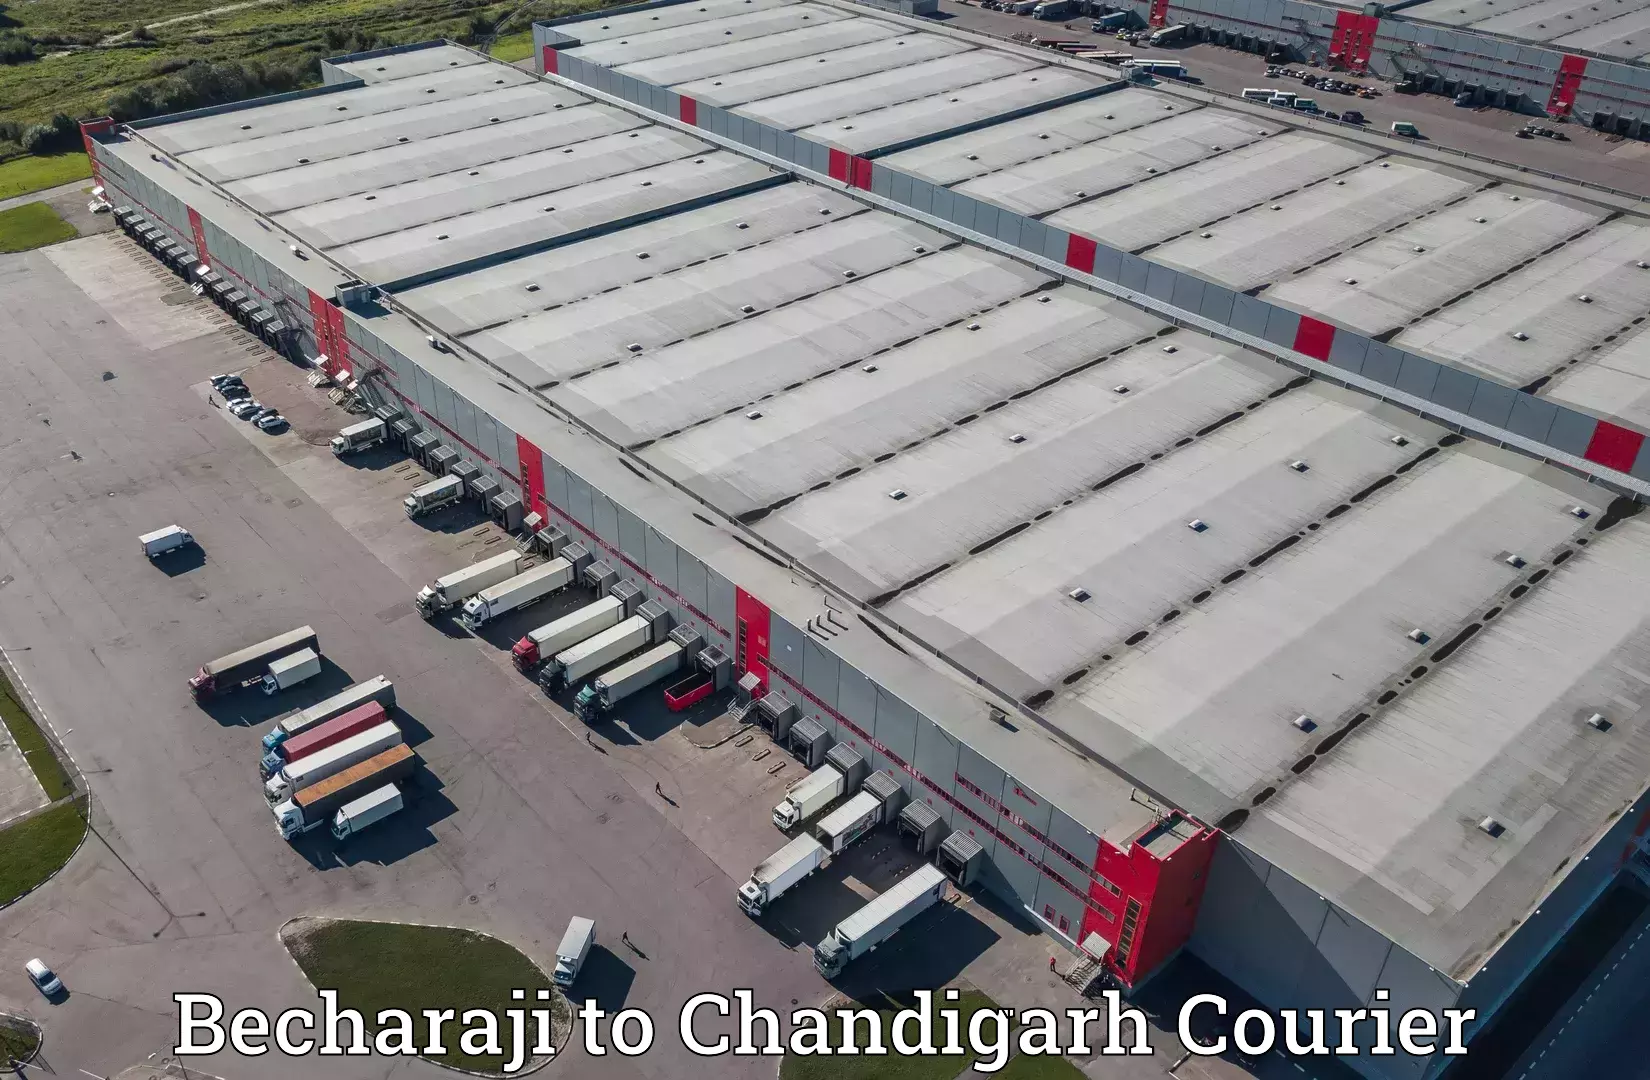 Courier service booking Becharaji to Chandigarh